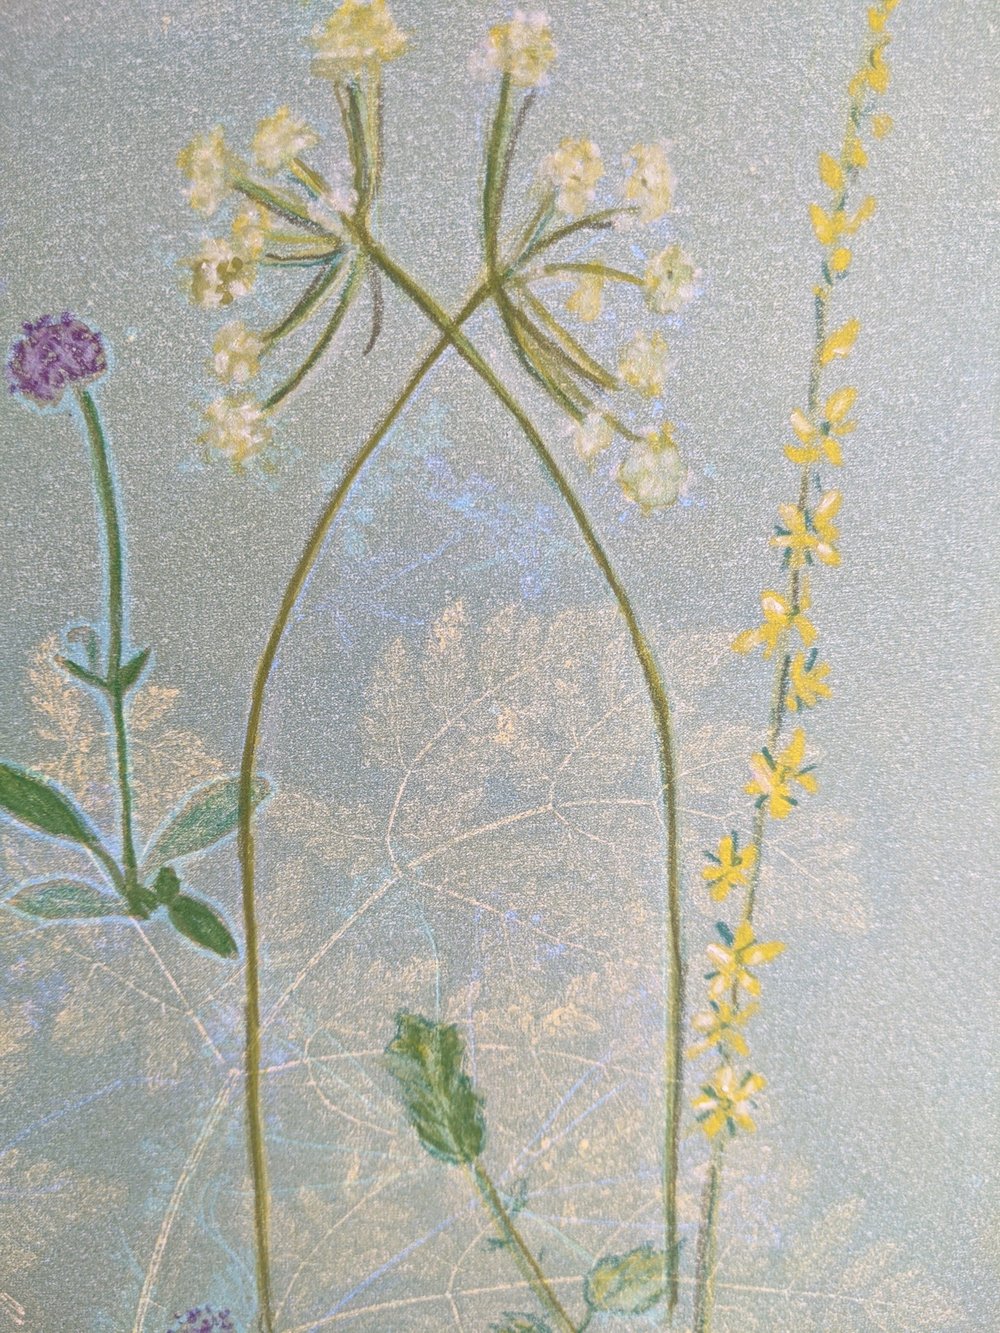 Monoprint artwork 'Just bees and things and flowers' by Jill Poole .jpg